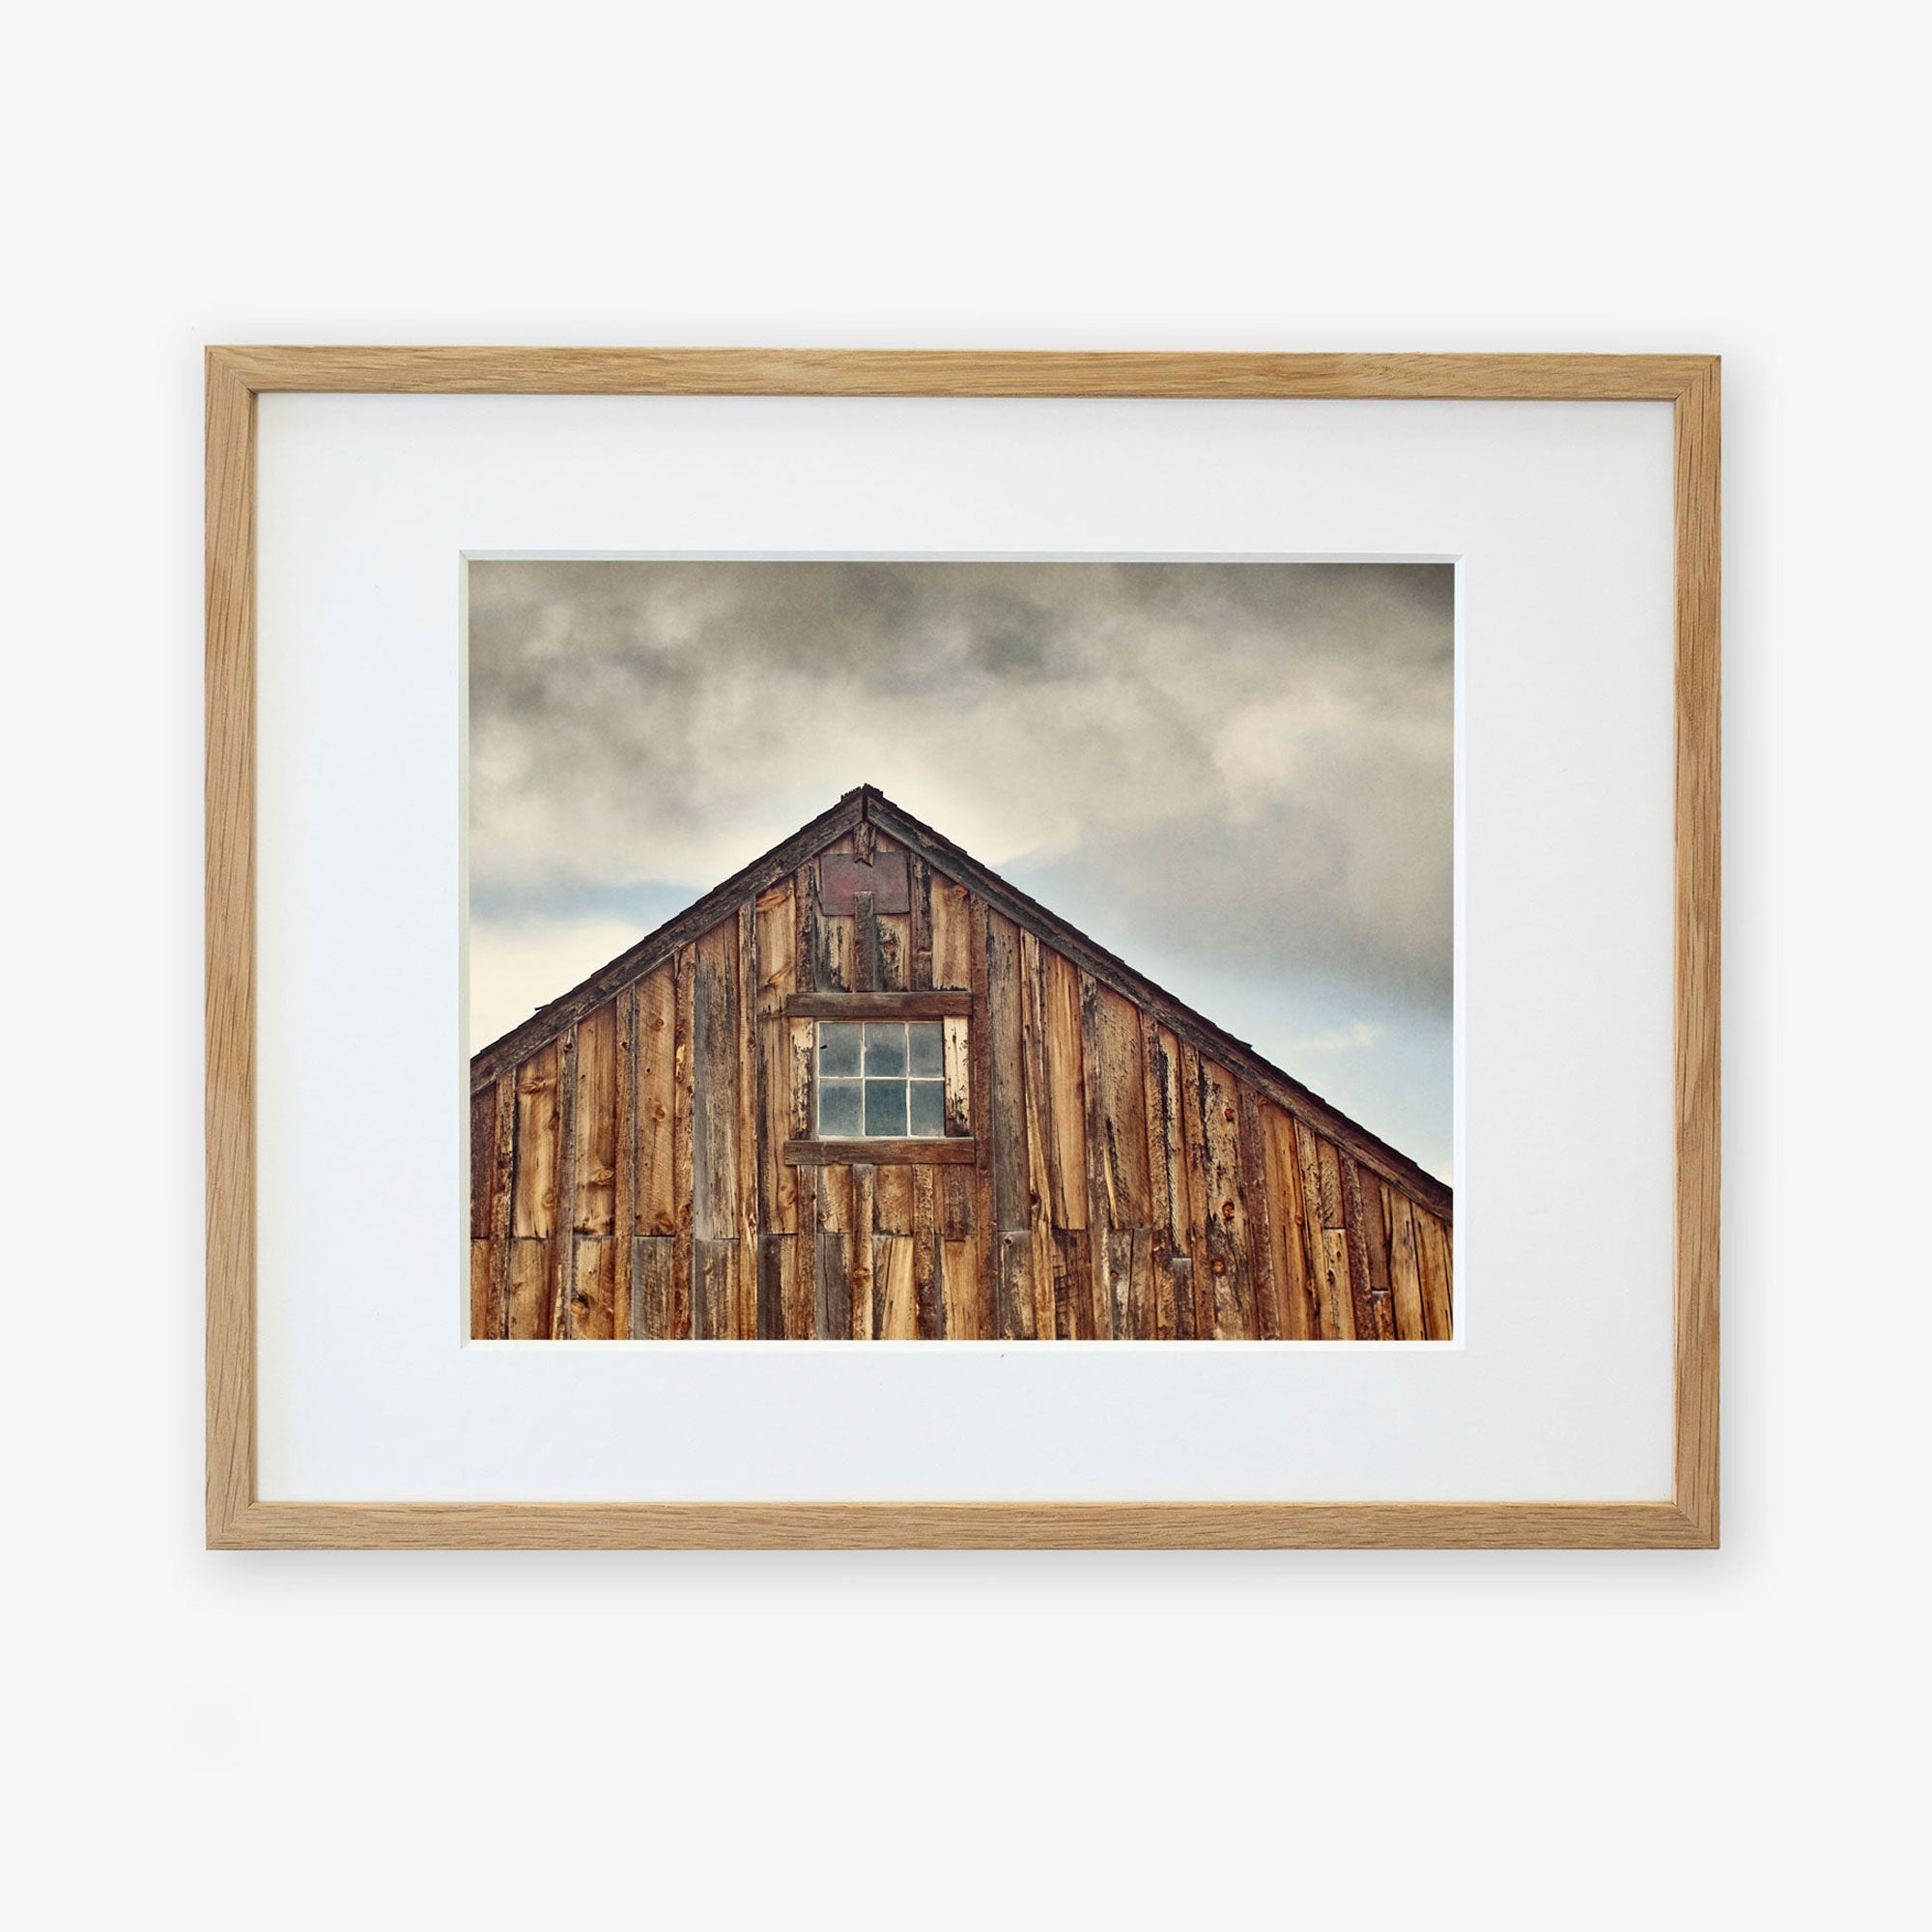 Offley Green's 'Old Barn at Bodie' Farmhouse Rustic Print, emphasizing rustic textures and a single central window, is framed in a simple and light-colored frame printed on archival photographic paper.